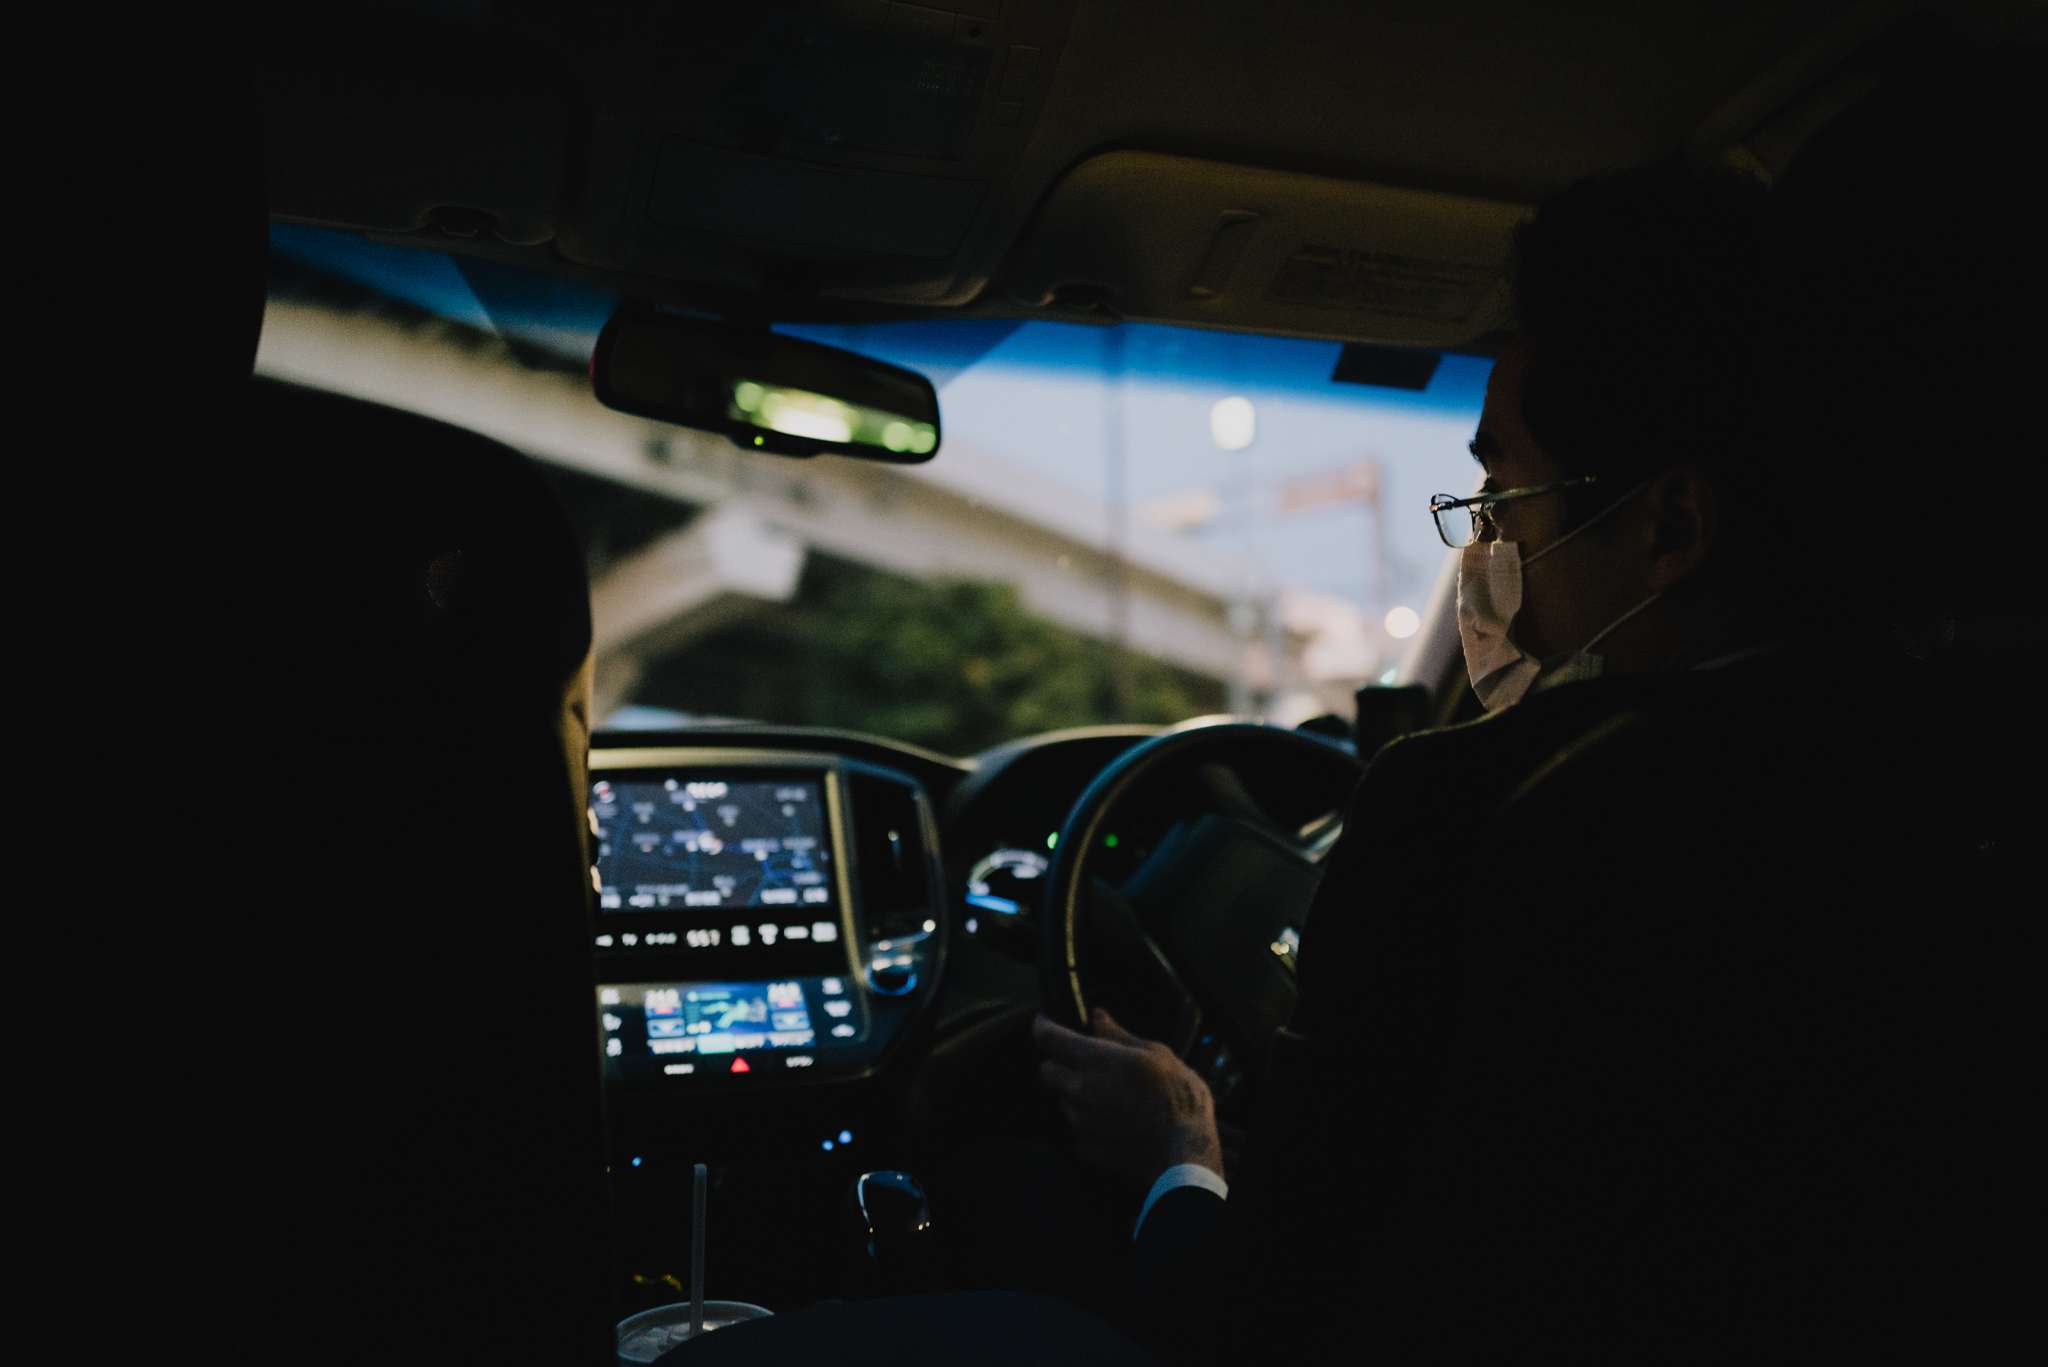 A taxi driver in Tokyo, Japan. Photographed with a Leica Q2.